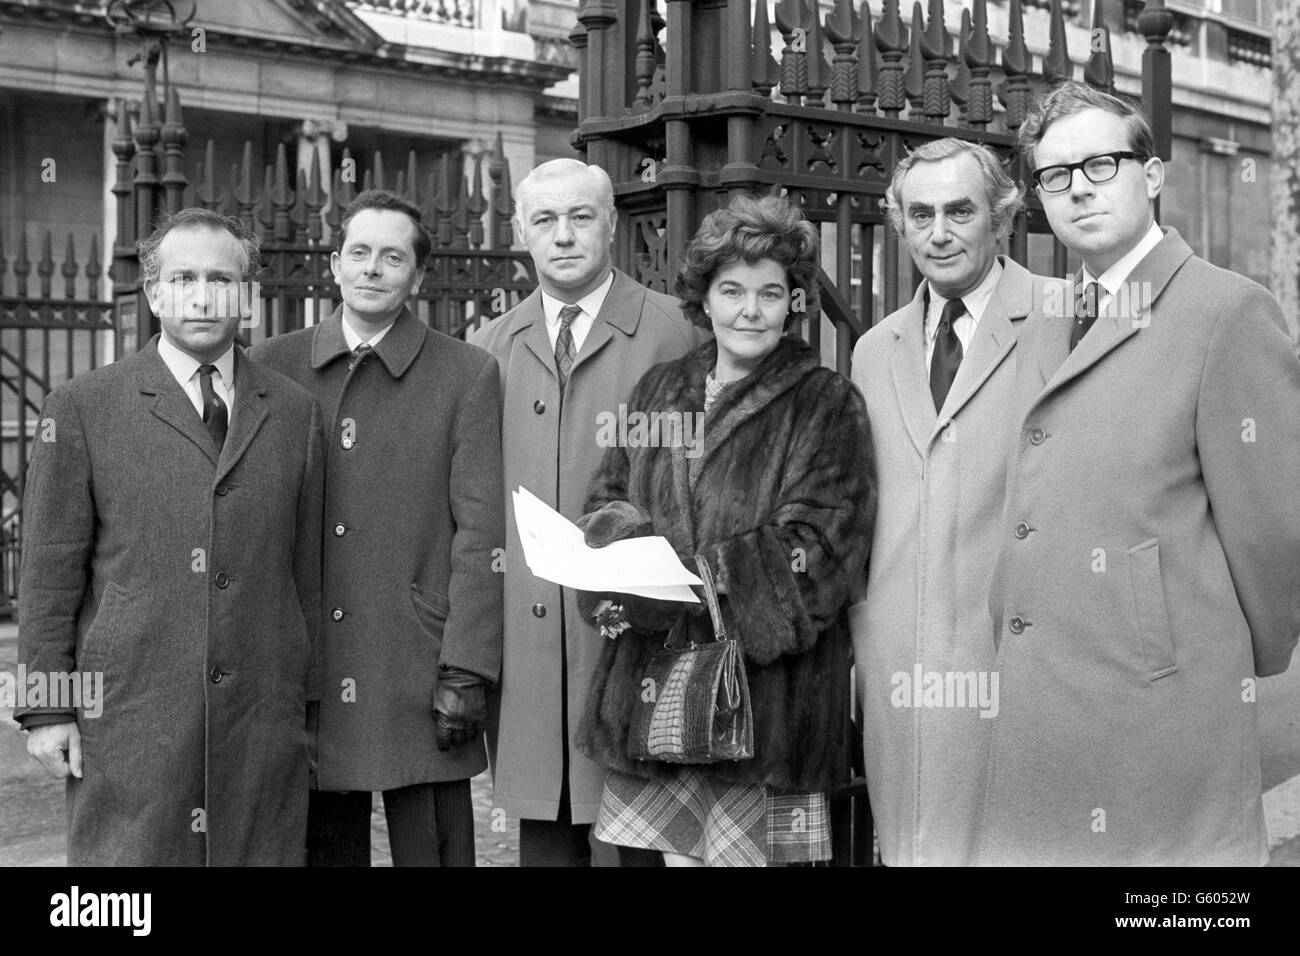 Six MPs from the Midlands in High Street, Kensington, en route to the Soviet Embassy, where they planned to deliver a letter of protest and pleading for human rights for Jews in the Soviet Union. From left, Greville Janner (North-west Leicester), Brian Waldon (Birmingham All Saints), Fergus Montgomery (Brierley Hill), delegation leader Jill Knight (Edgbaston), Maurice Edelman (Coverntry North) and Patrick Cormack (Cannock). Stock Photo